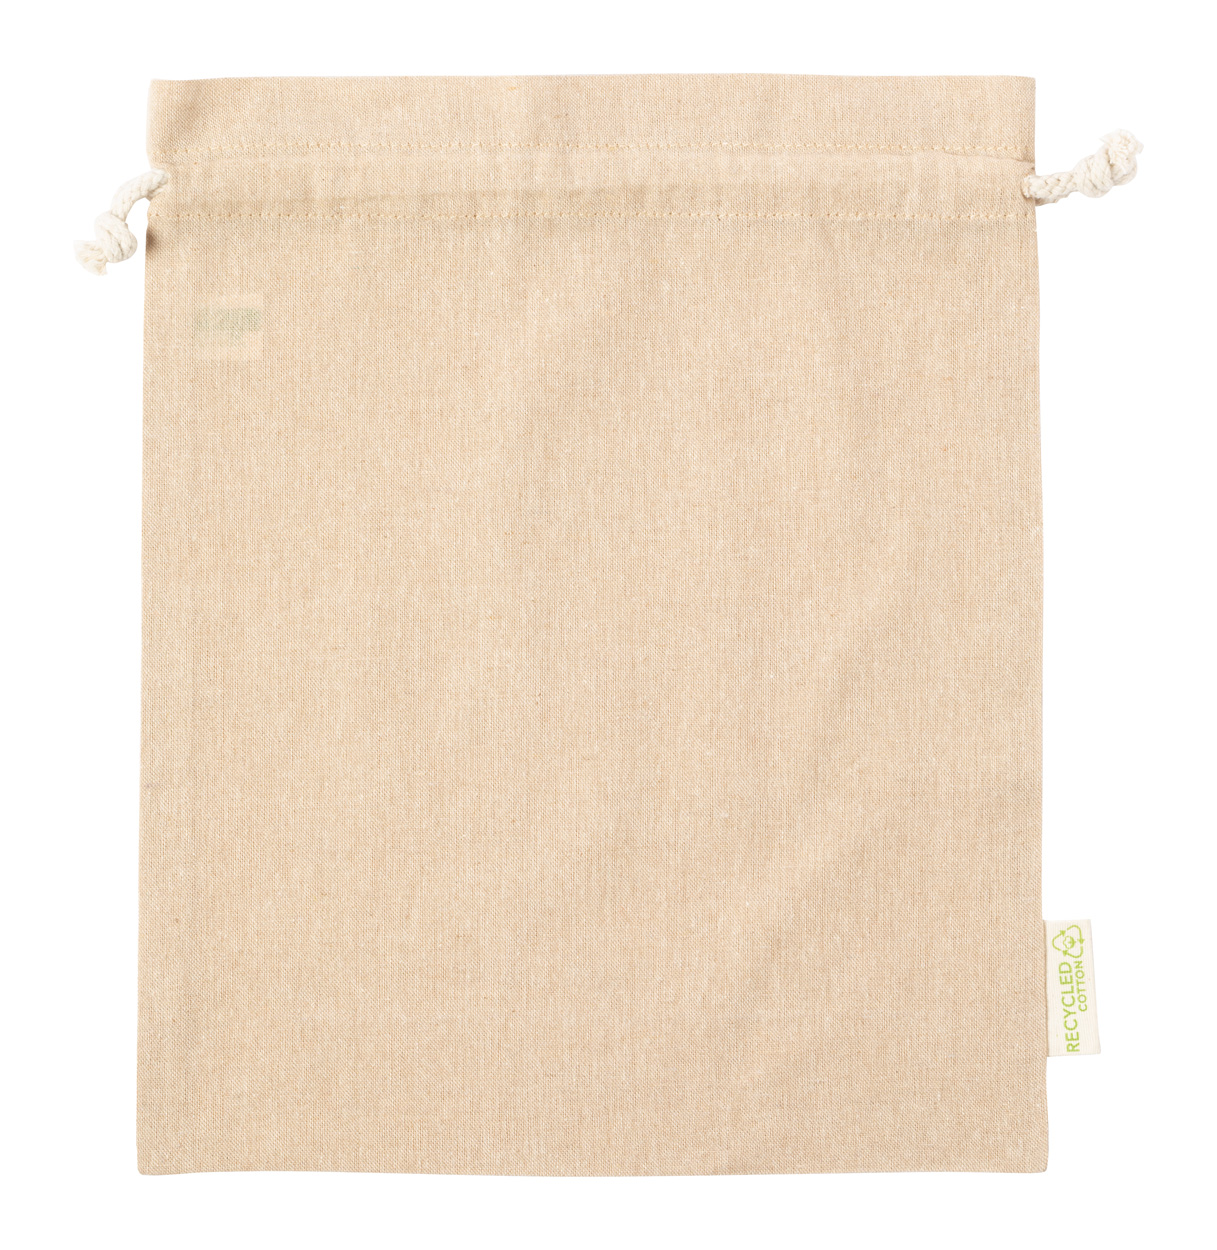 Recycled cotton grocery bag MURFIX